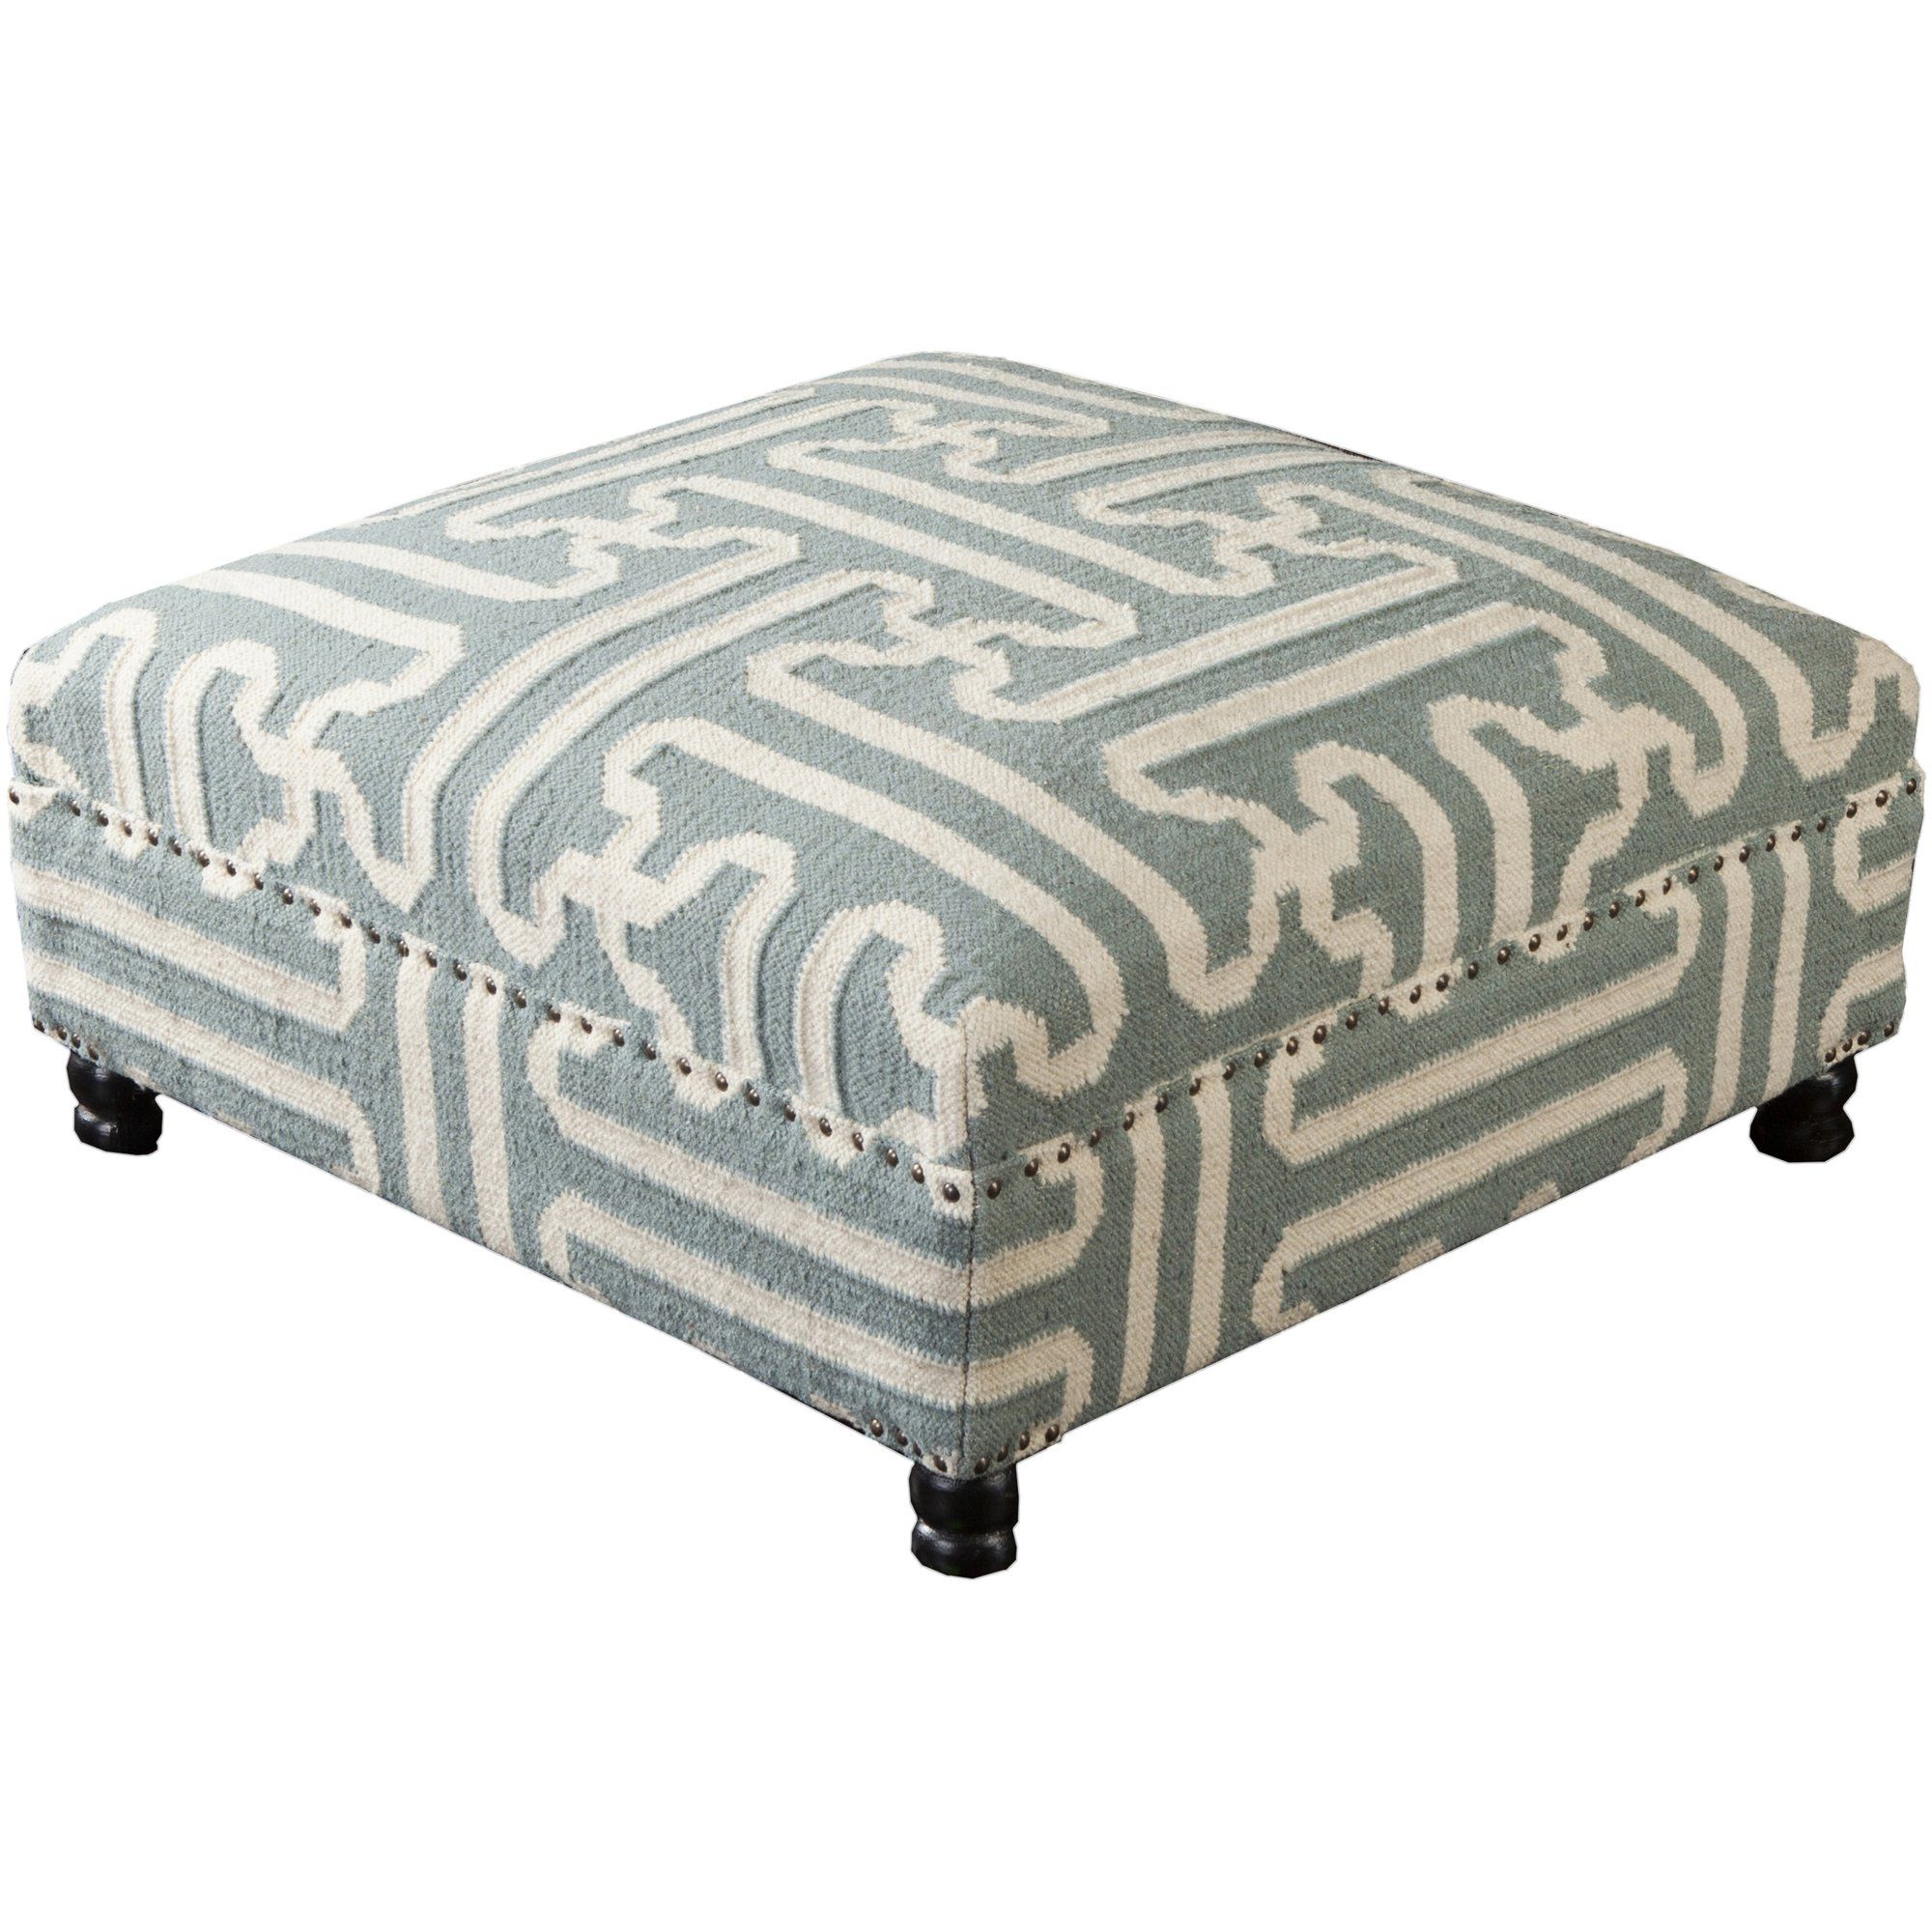 Current Amazon: Surya Ottoman, 323216 Inch, Slate/beige : Home & Kitchen With 16 Inch Ottomans (View 8 of 10)